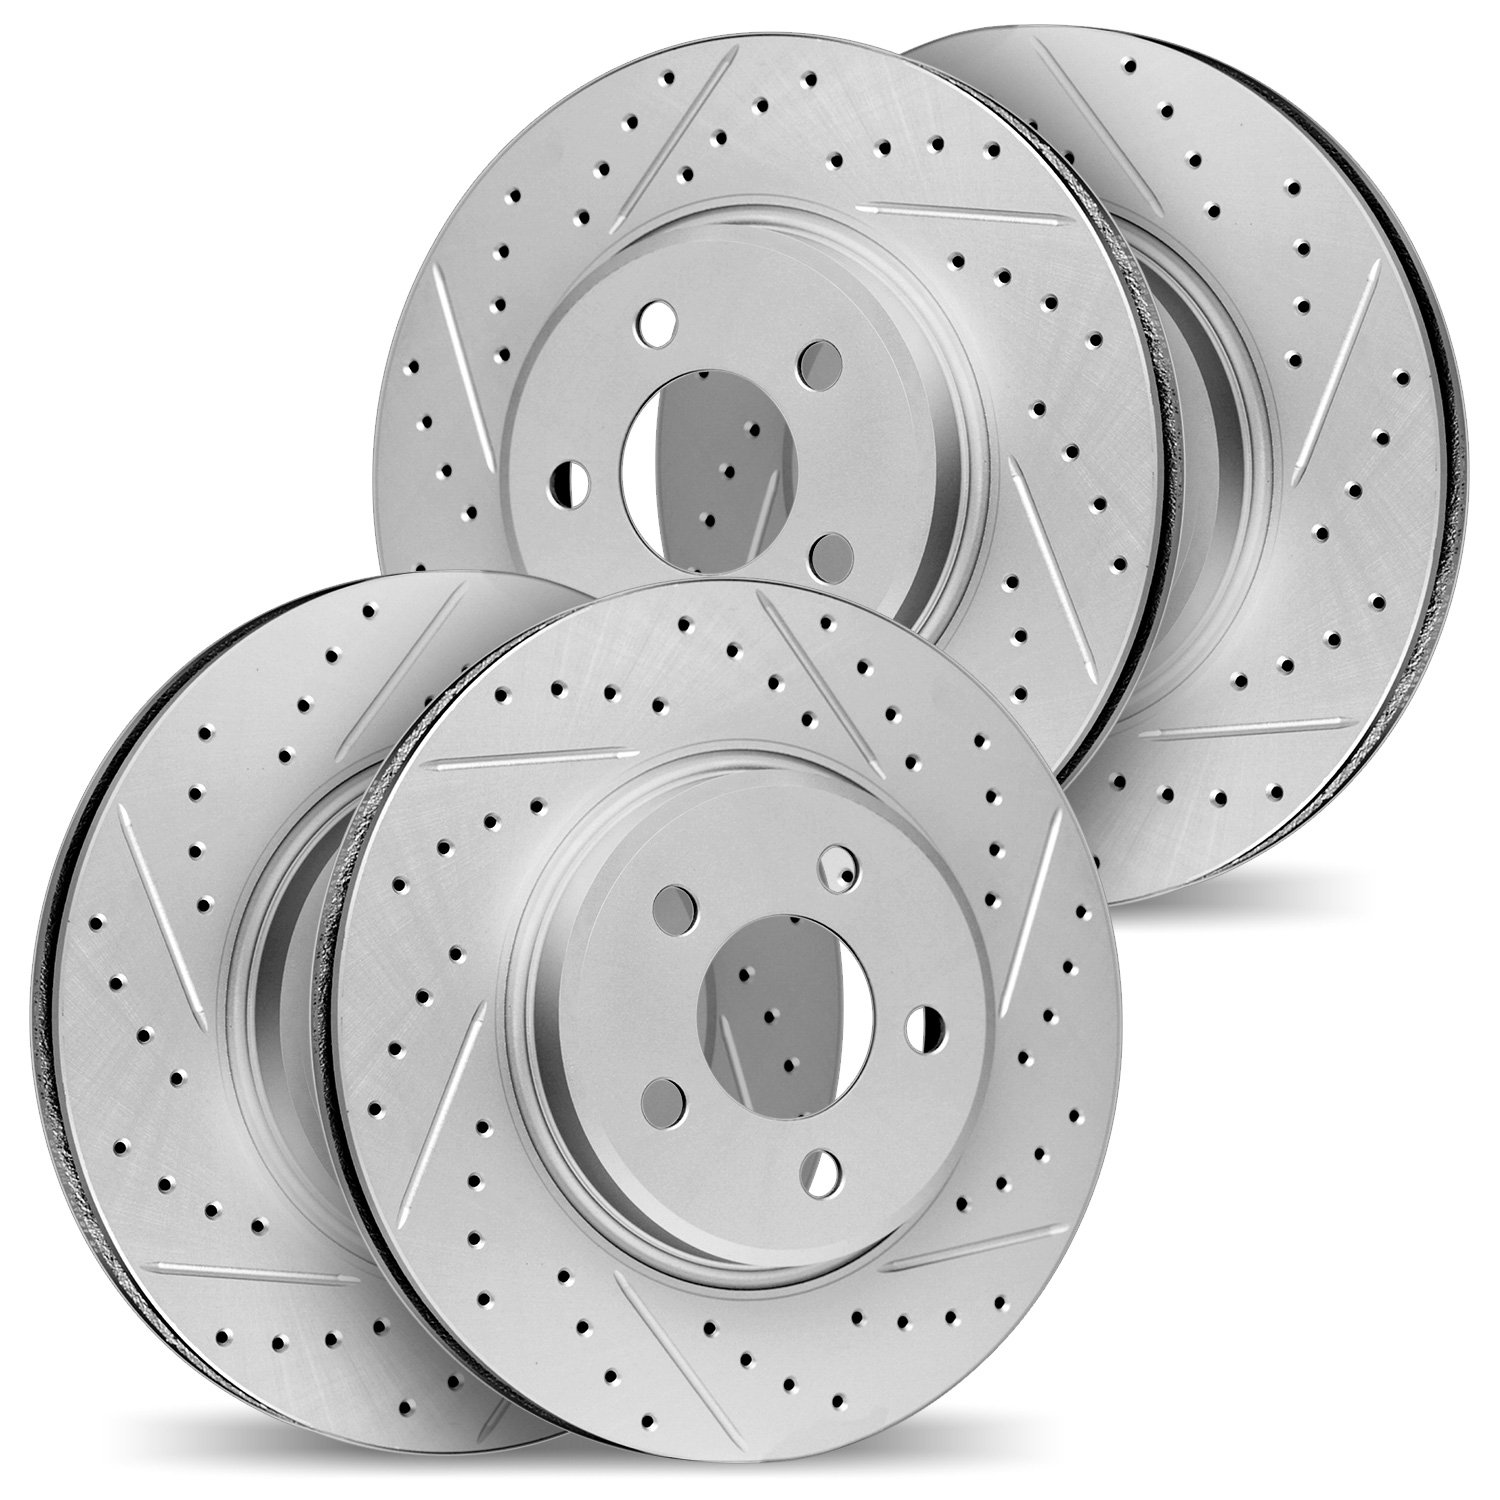 2004-31021 Geoperformance Drilled/Slotted Brake Rotors, 2014-2015 BMW, Position: Front and Rear